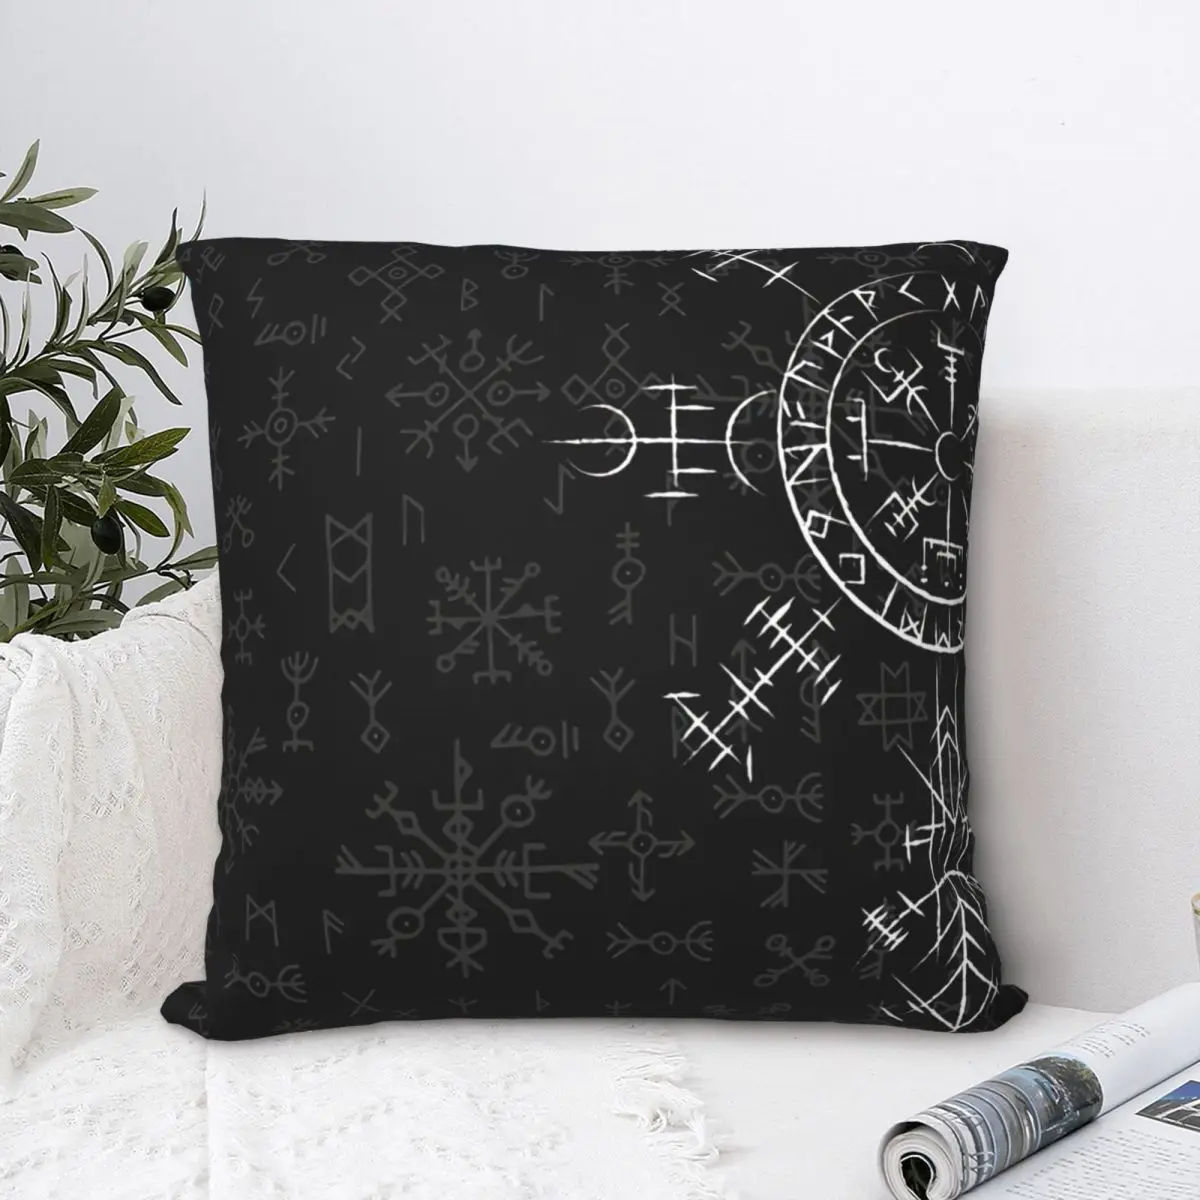 

Celtic Lucky Charm Compass Symbole Celtic Vegvisir Pillowcase Viking Norse Backpack Cushion For Sofa Coussin Covers Decorative